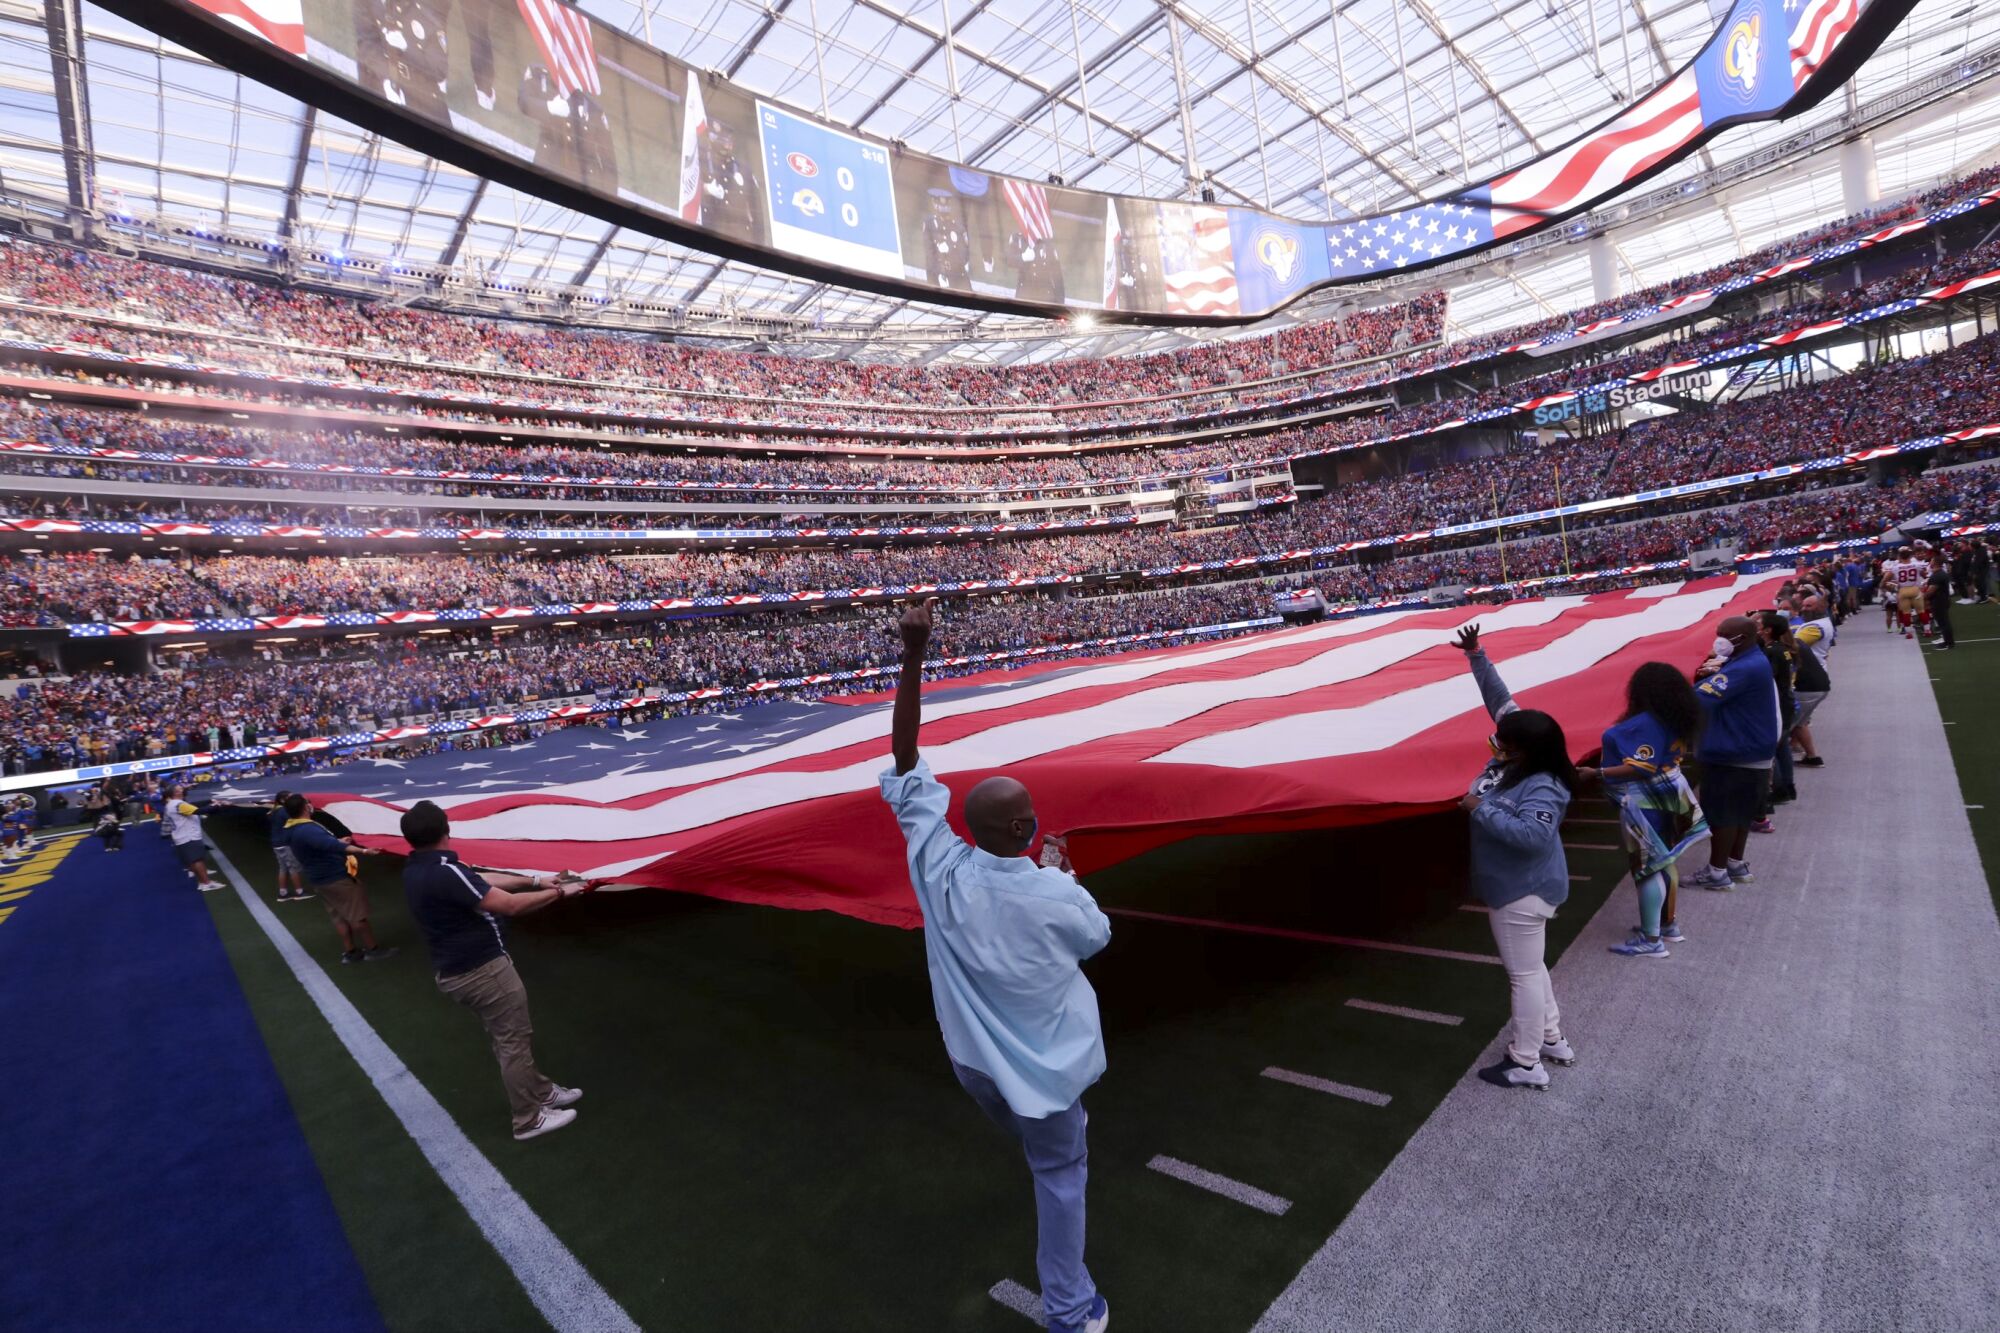 The American flag is adorned on the field before the game between the Los Angeles Rams and San Francisco 49ers.